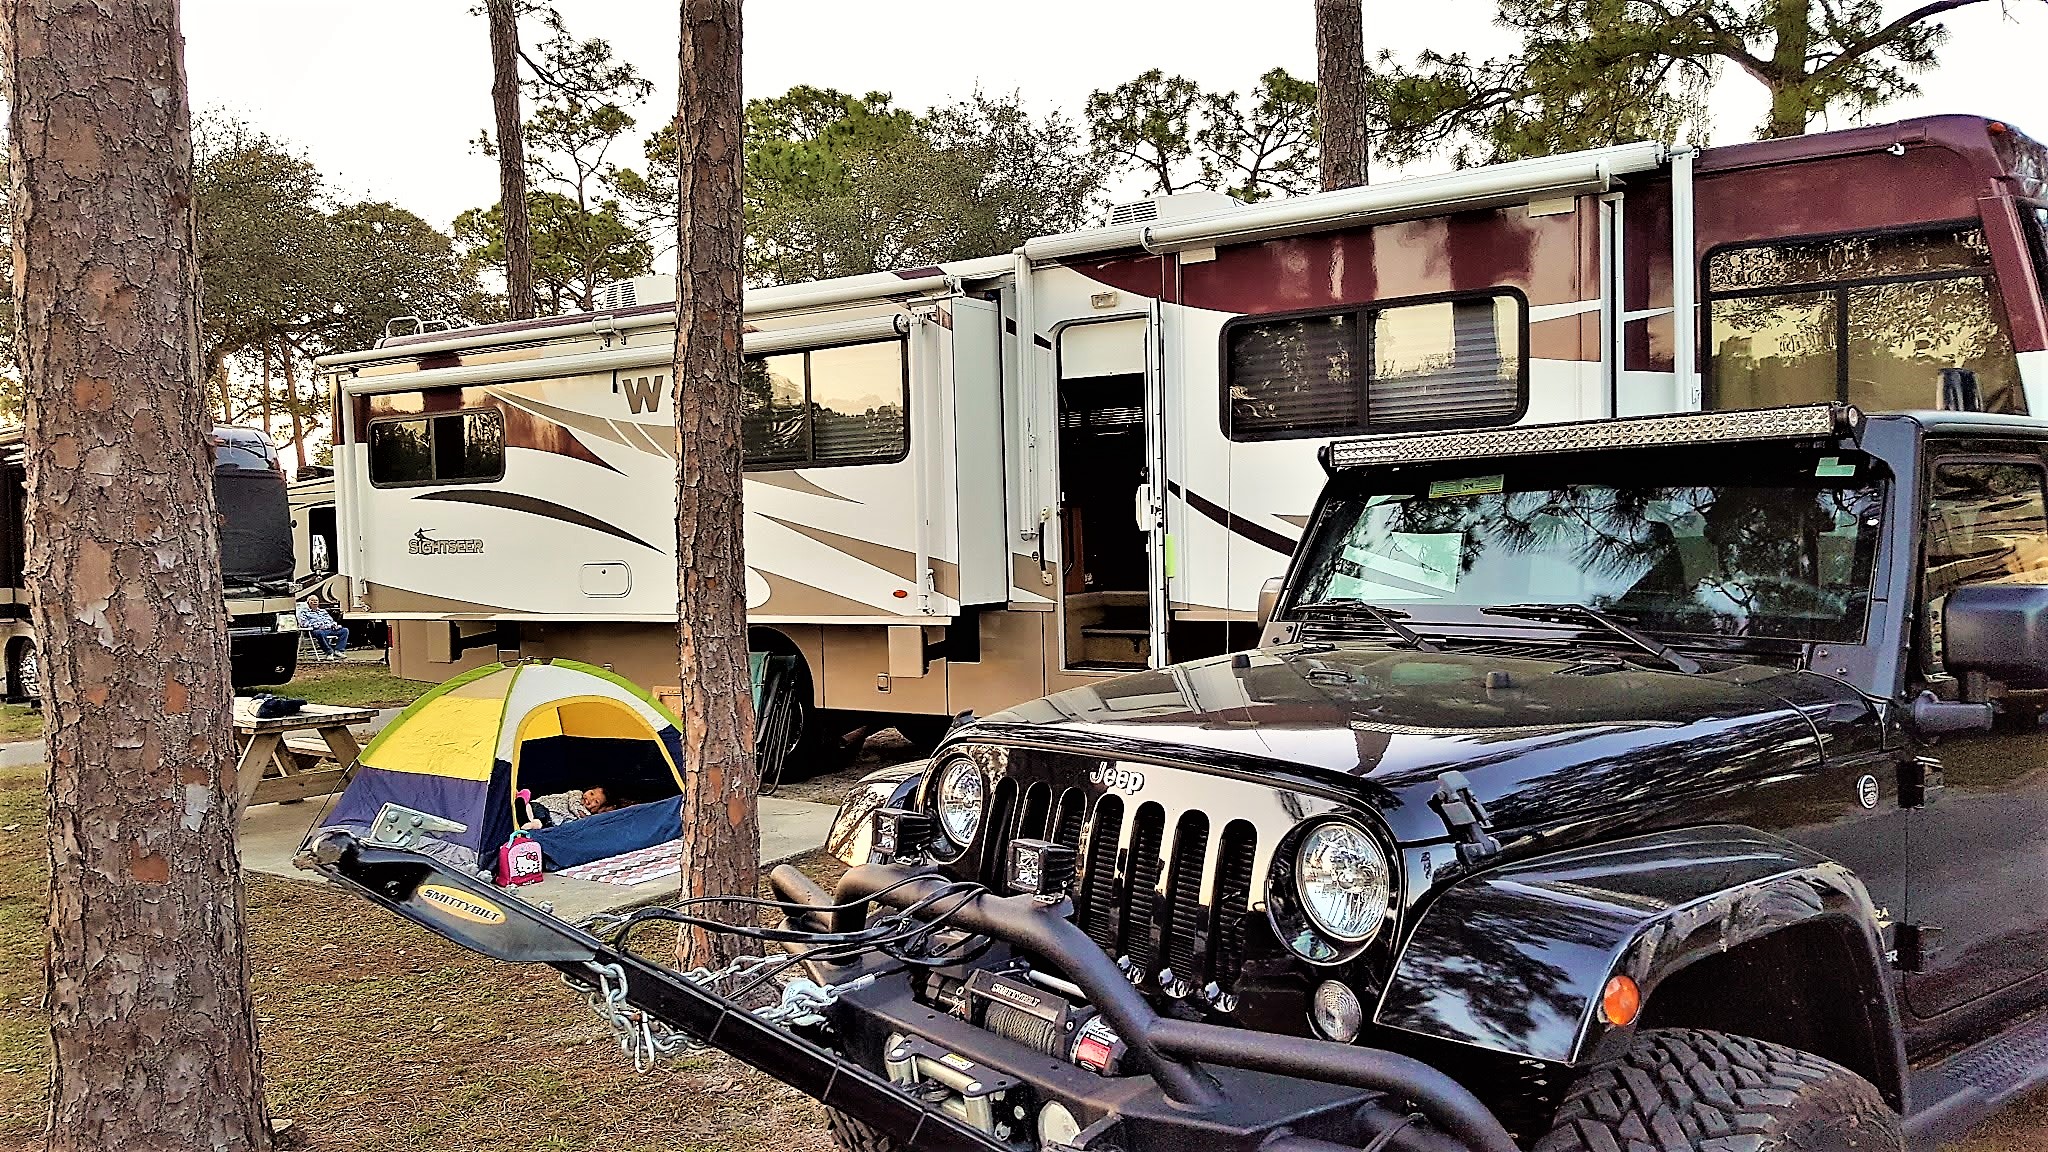 Winnebago Sightseer in campground with small tent and a jeep out front.